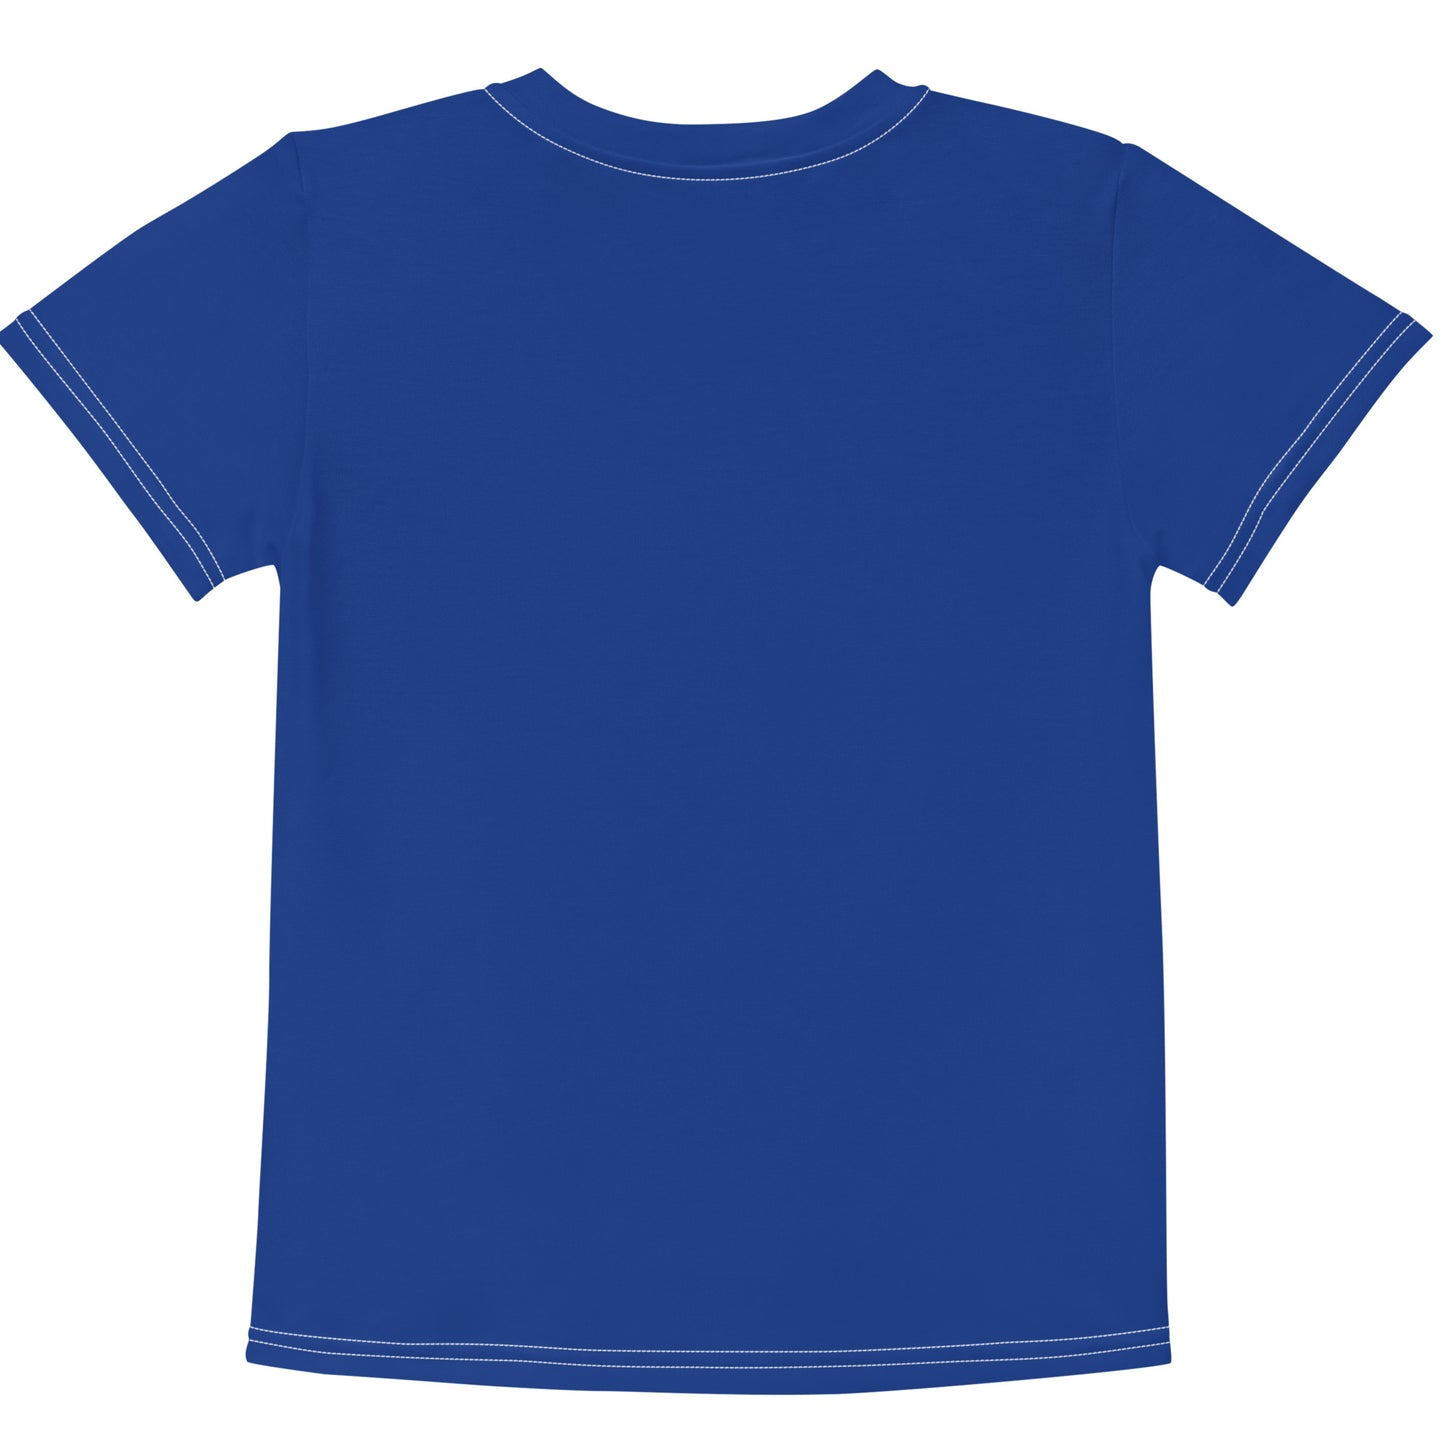 Azure Climate Change Global Warming Statement - Sustainably Made Kid's T-Shirt